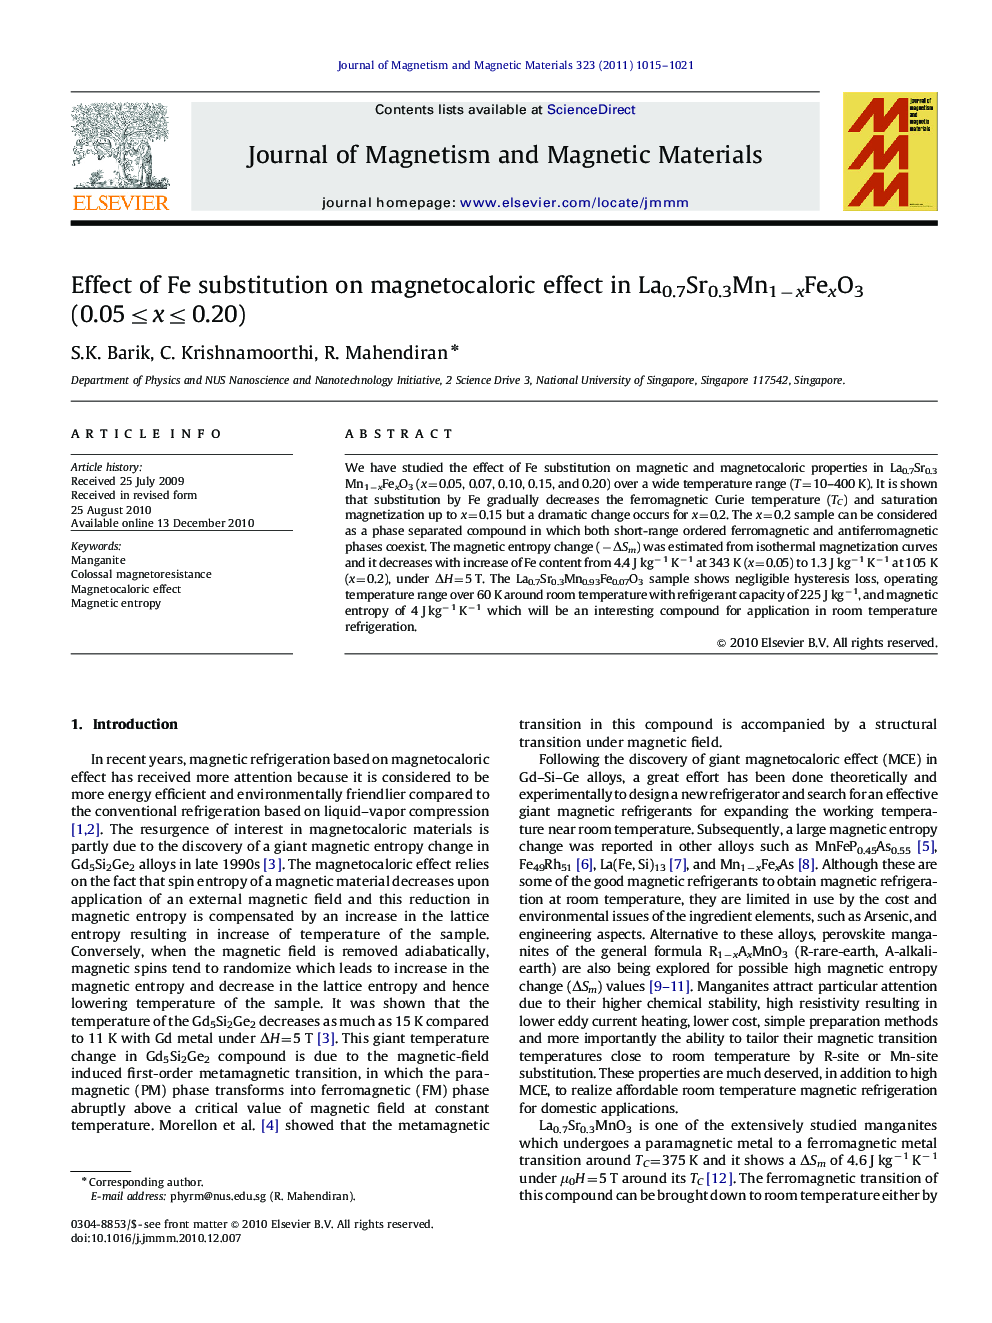 Effect of Fe substitution on magnetocaloric effect in La0.7Sr0.3Mn1âxFexO3 (0.05â¤xâ¤0.20)